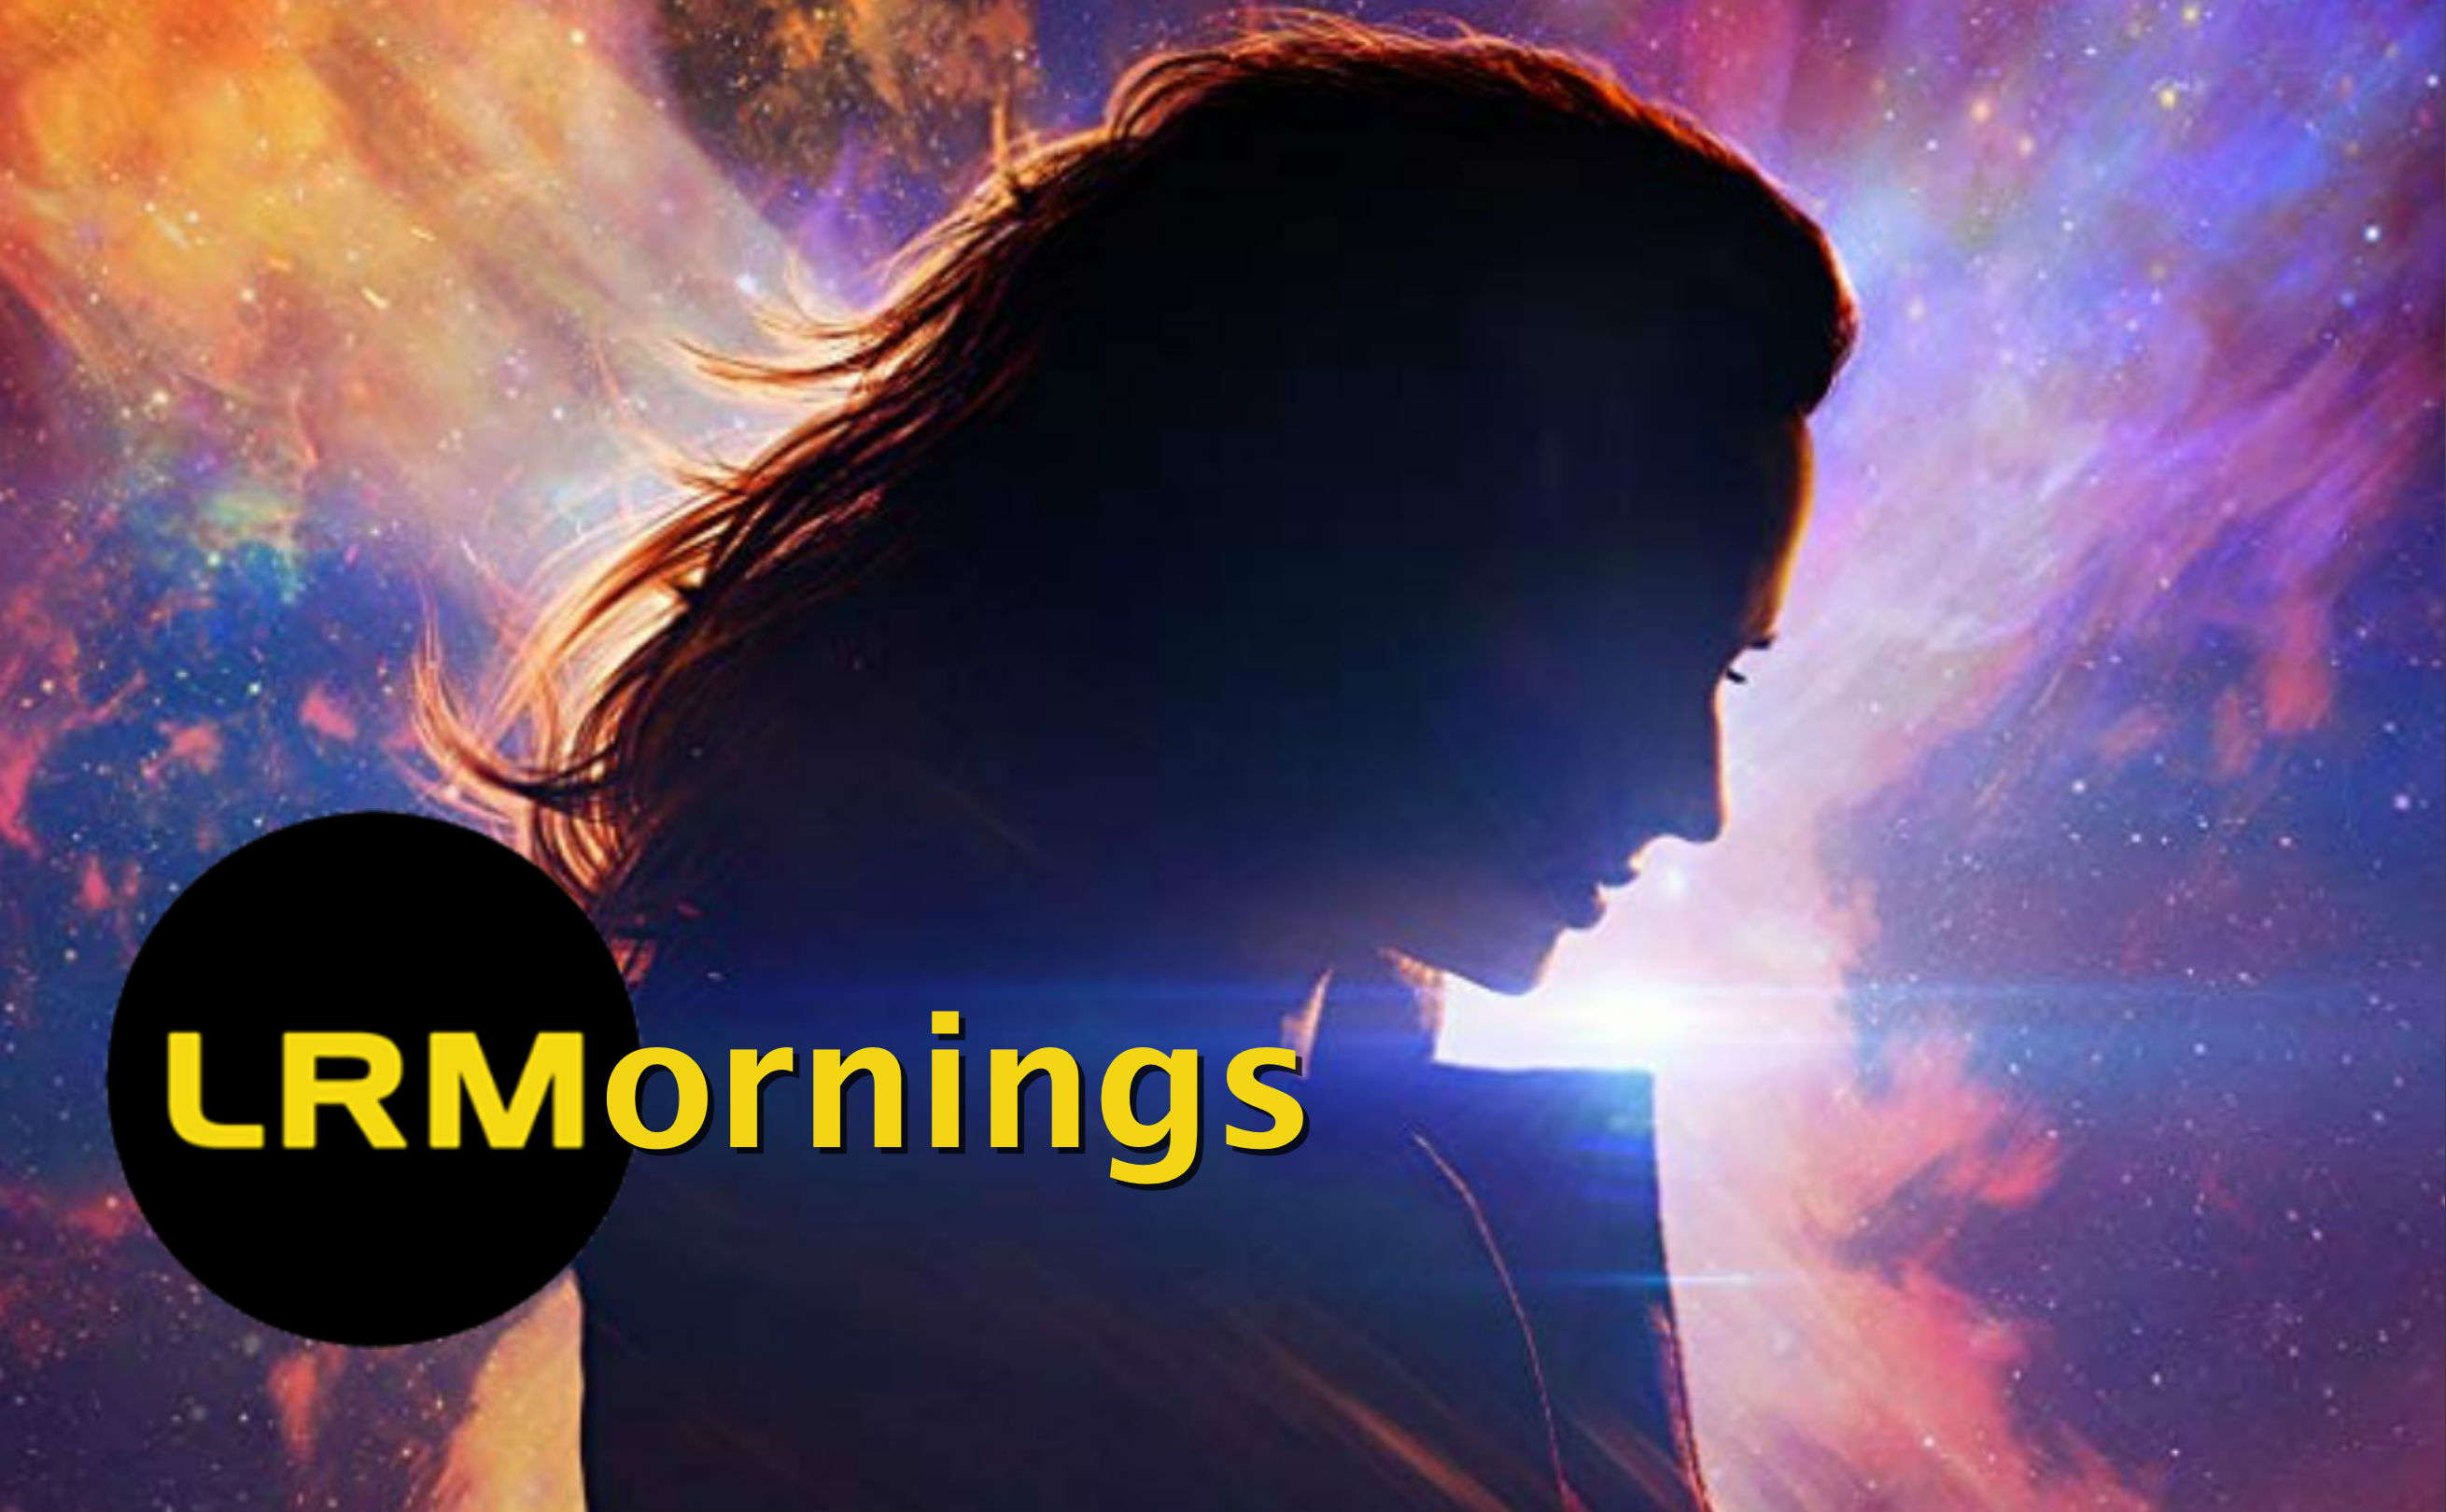 Dark Phoenix Reshot To Avoid Similarities To Another Film? Geeky Would You Rather | LRMornings